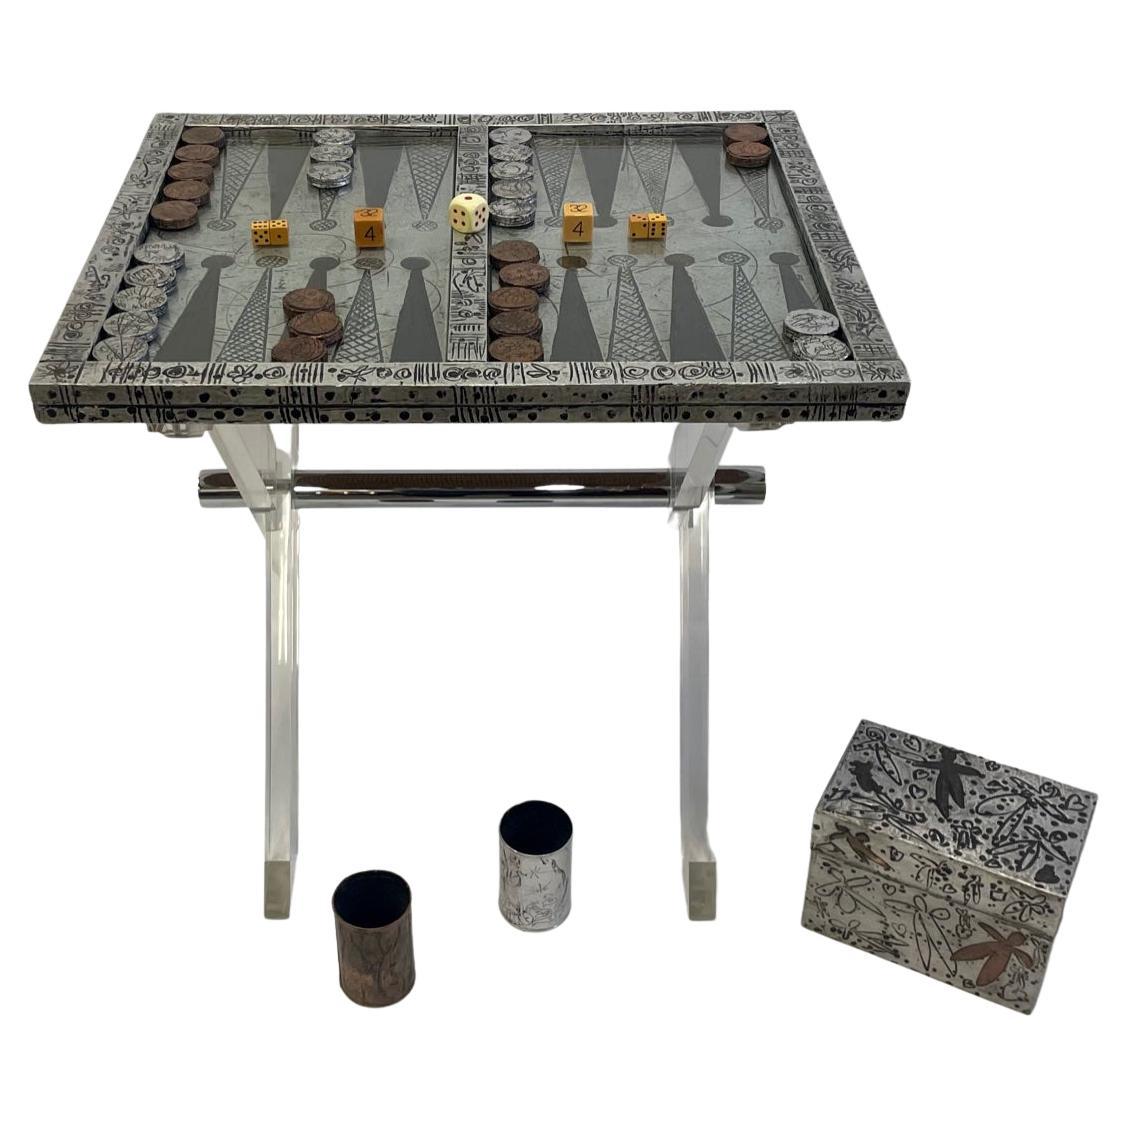 A true work of art by deceased Palm Beach artist Marvin Arenson, a sheathed metal over wood backgammon board with whimsical hand wrought repousse designs. Comes with an equally beautiful matching box with game pieces and cups. All are works of art.